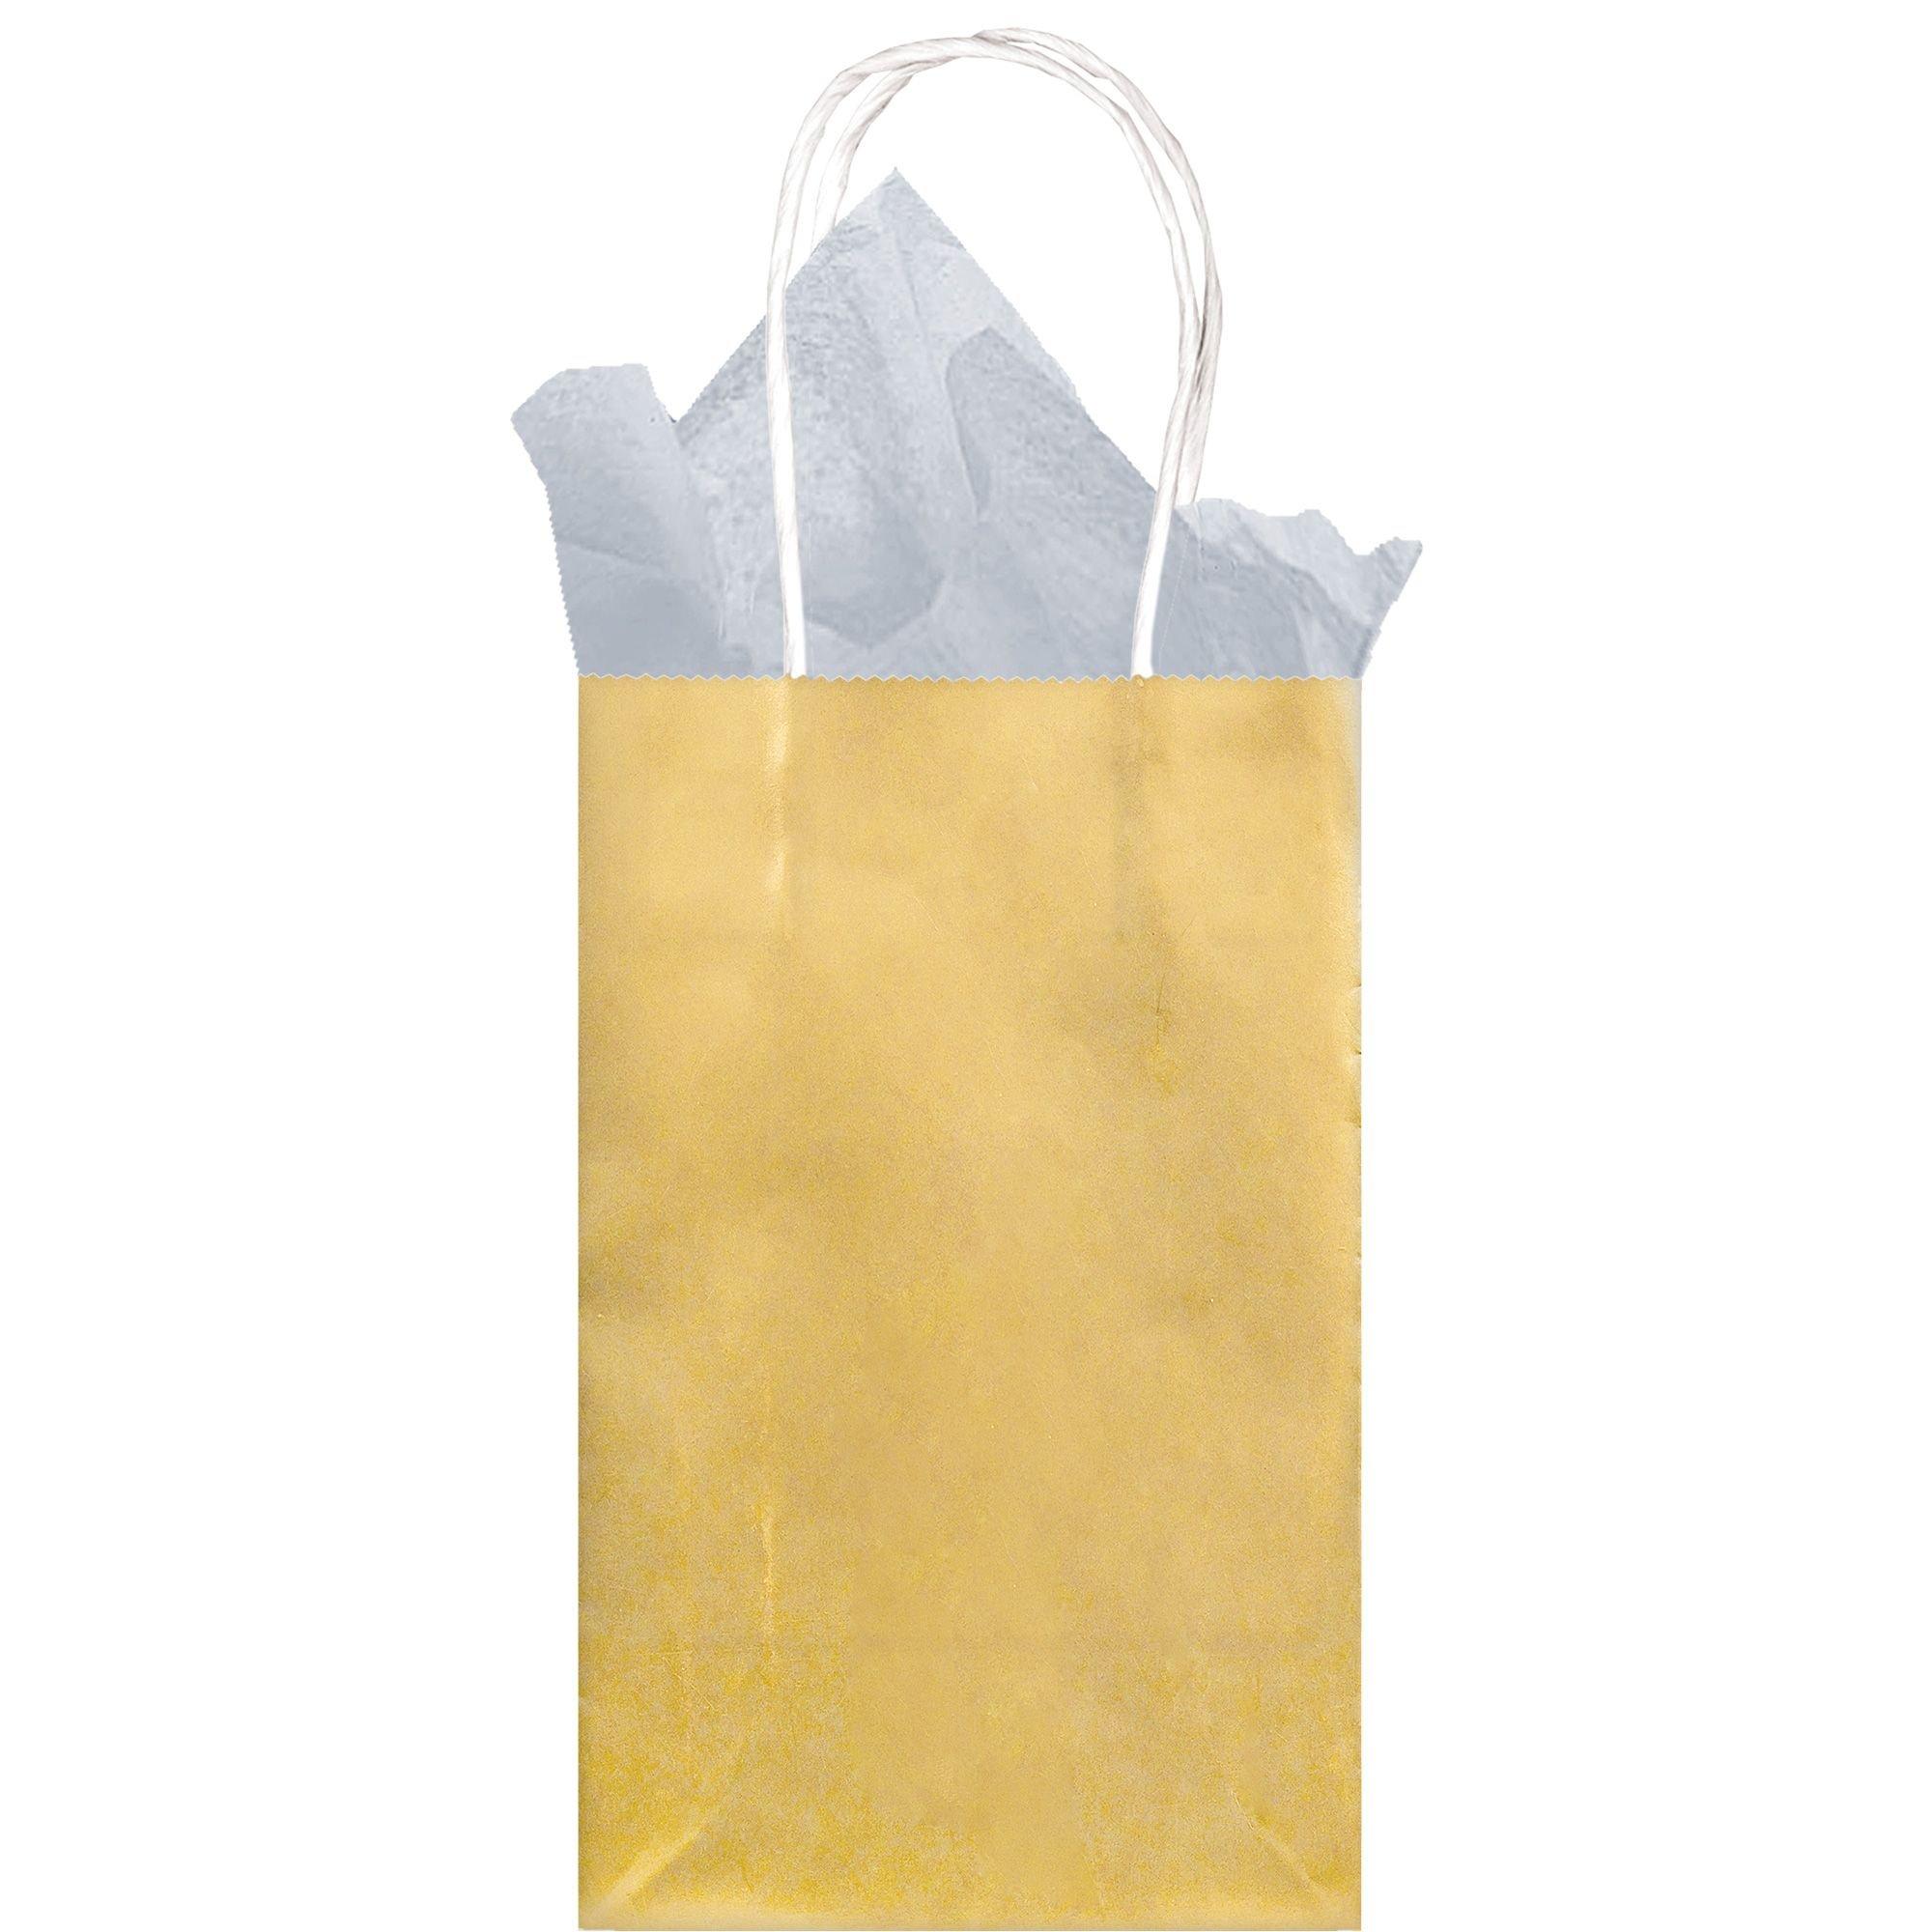 Small Metallic Gold Paper Gift Bags with Metallic Handles, Party Favor Bags,  Inches - Kroger